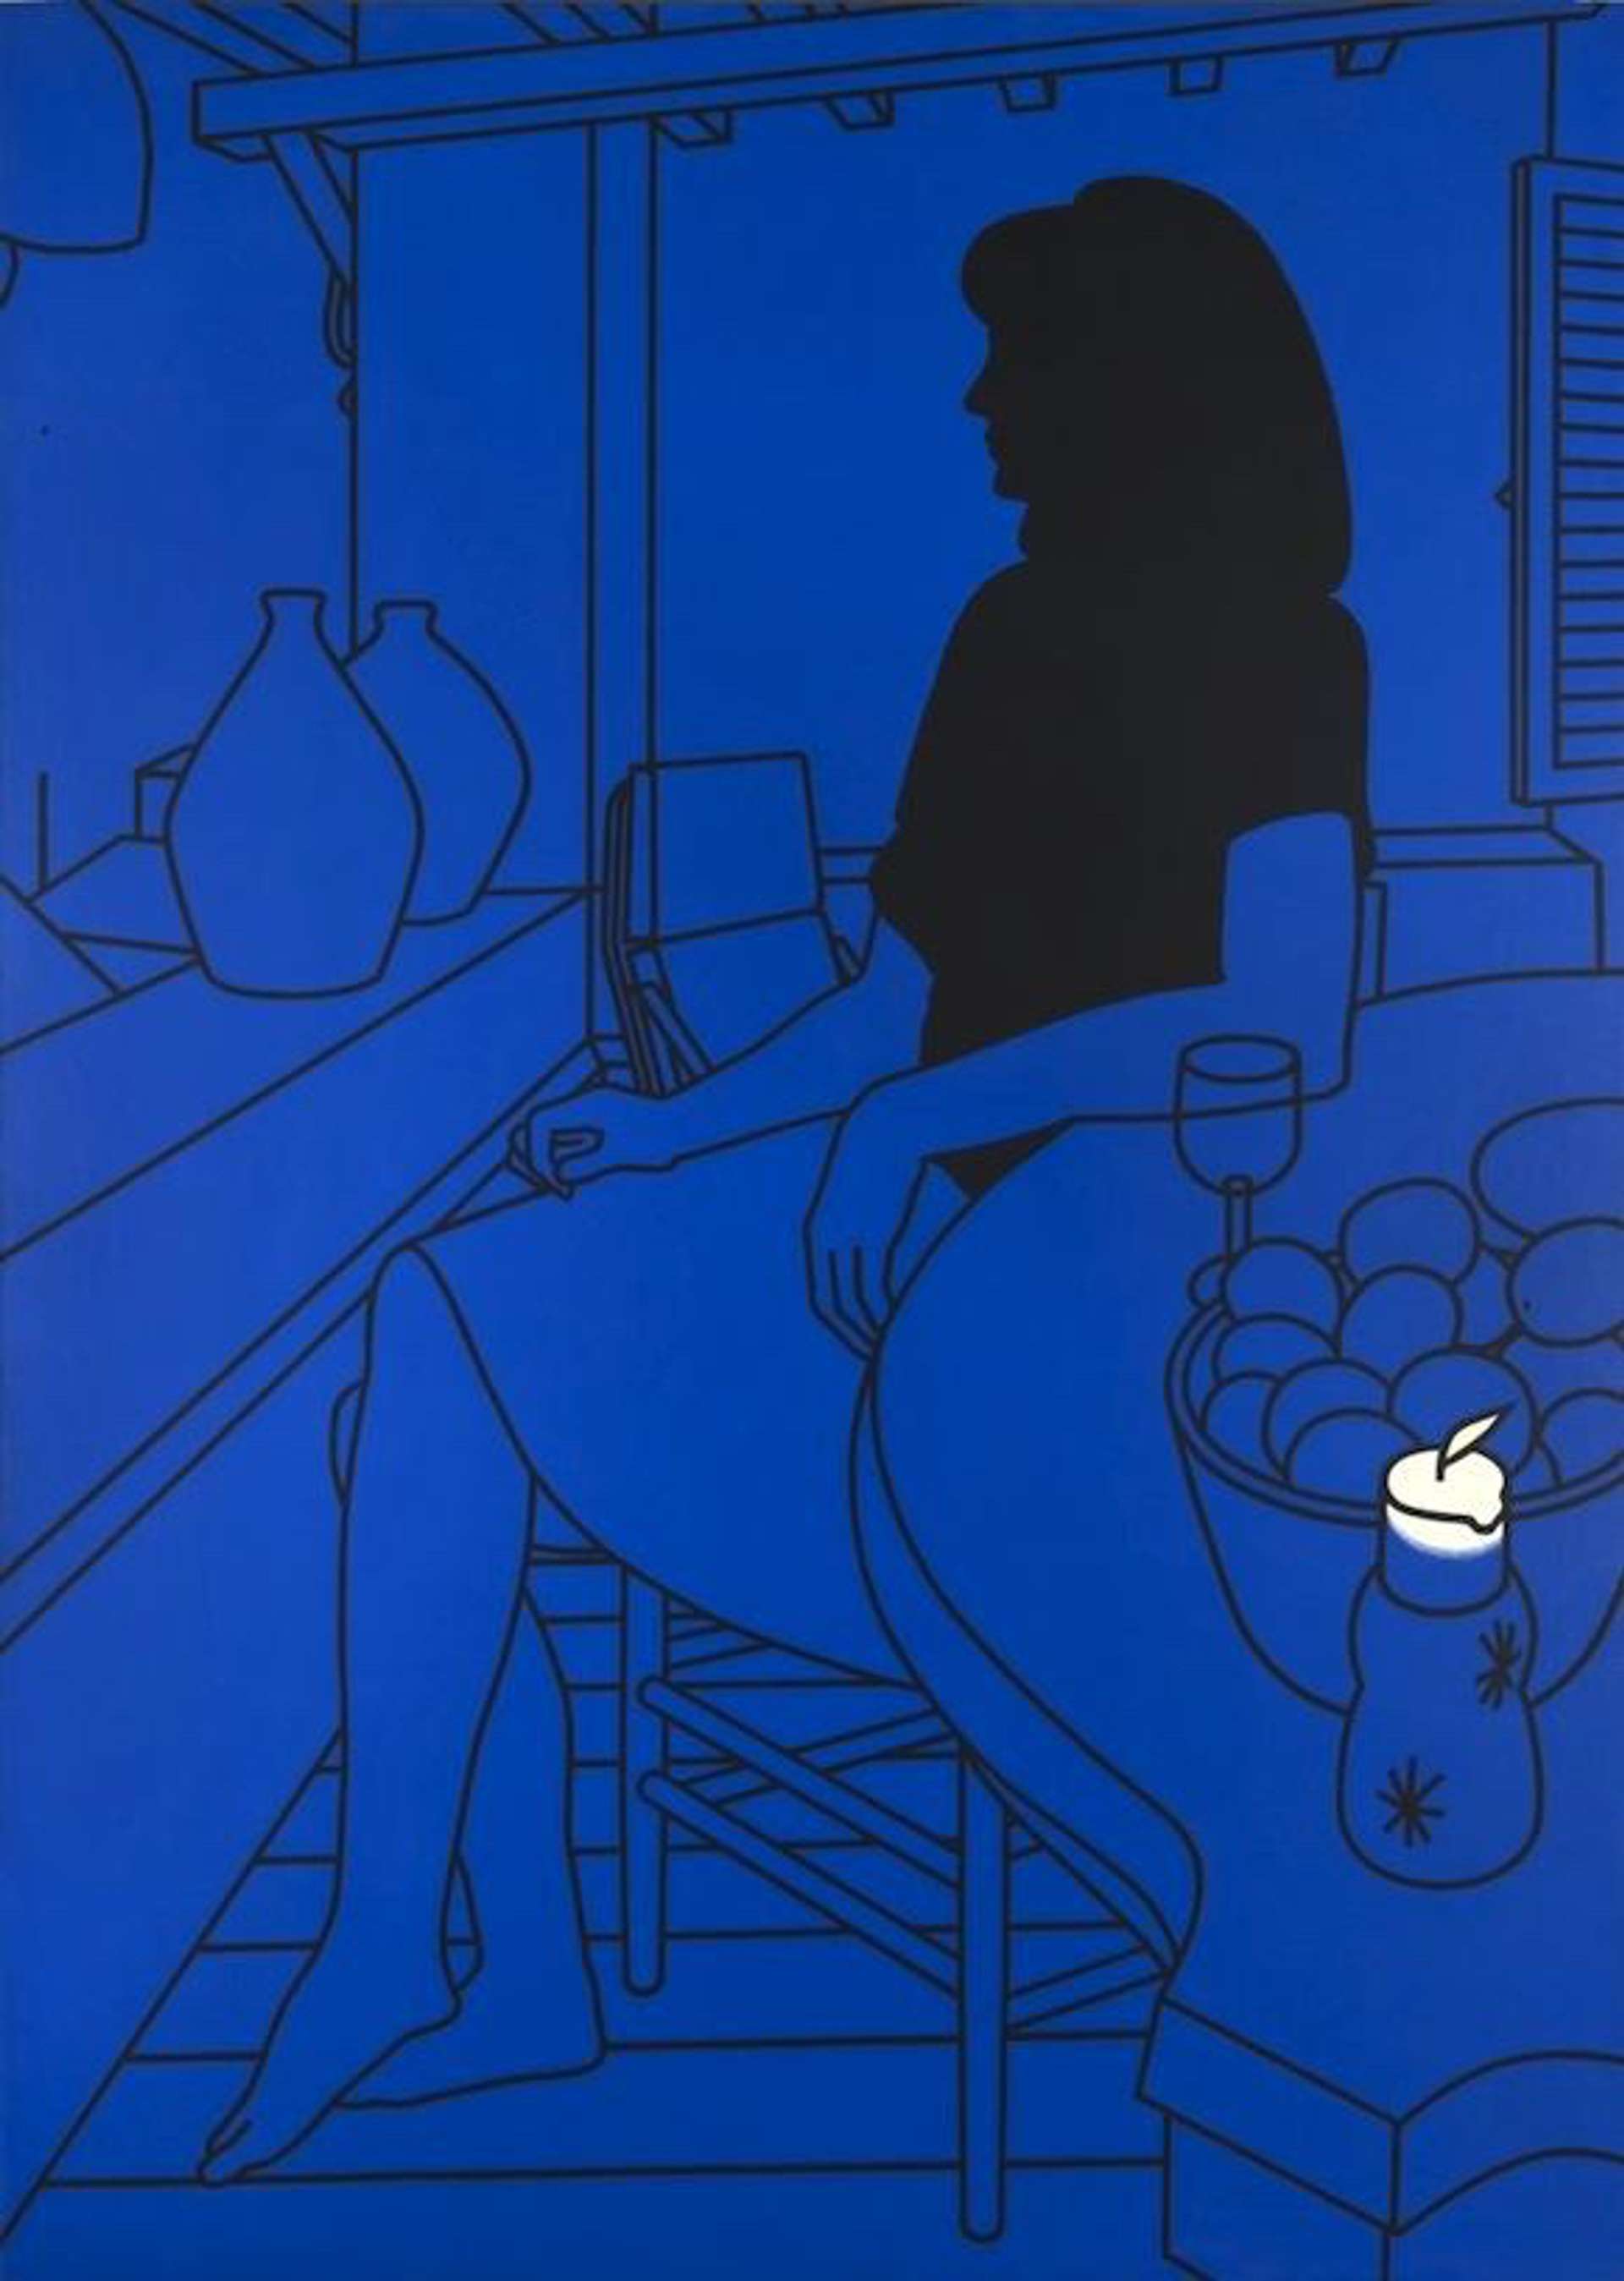 "Girl on Terrace" by Patrick Caulfield: A black outline of a female figure sitting on a terrace against a royal blue background. A single white candle is highlighted in the bottom right corner.